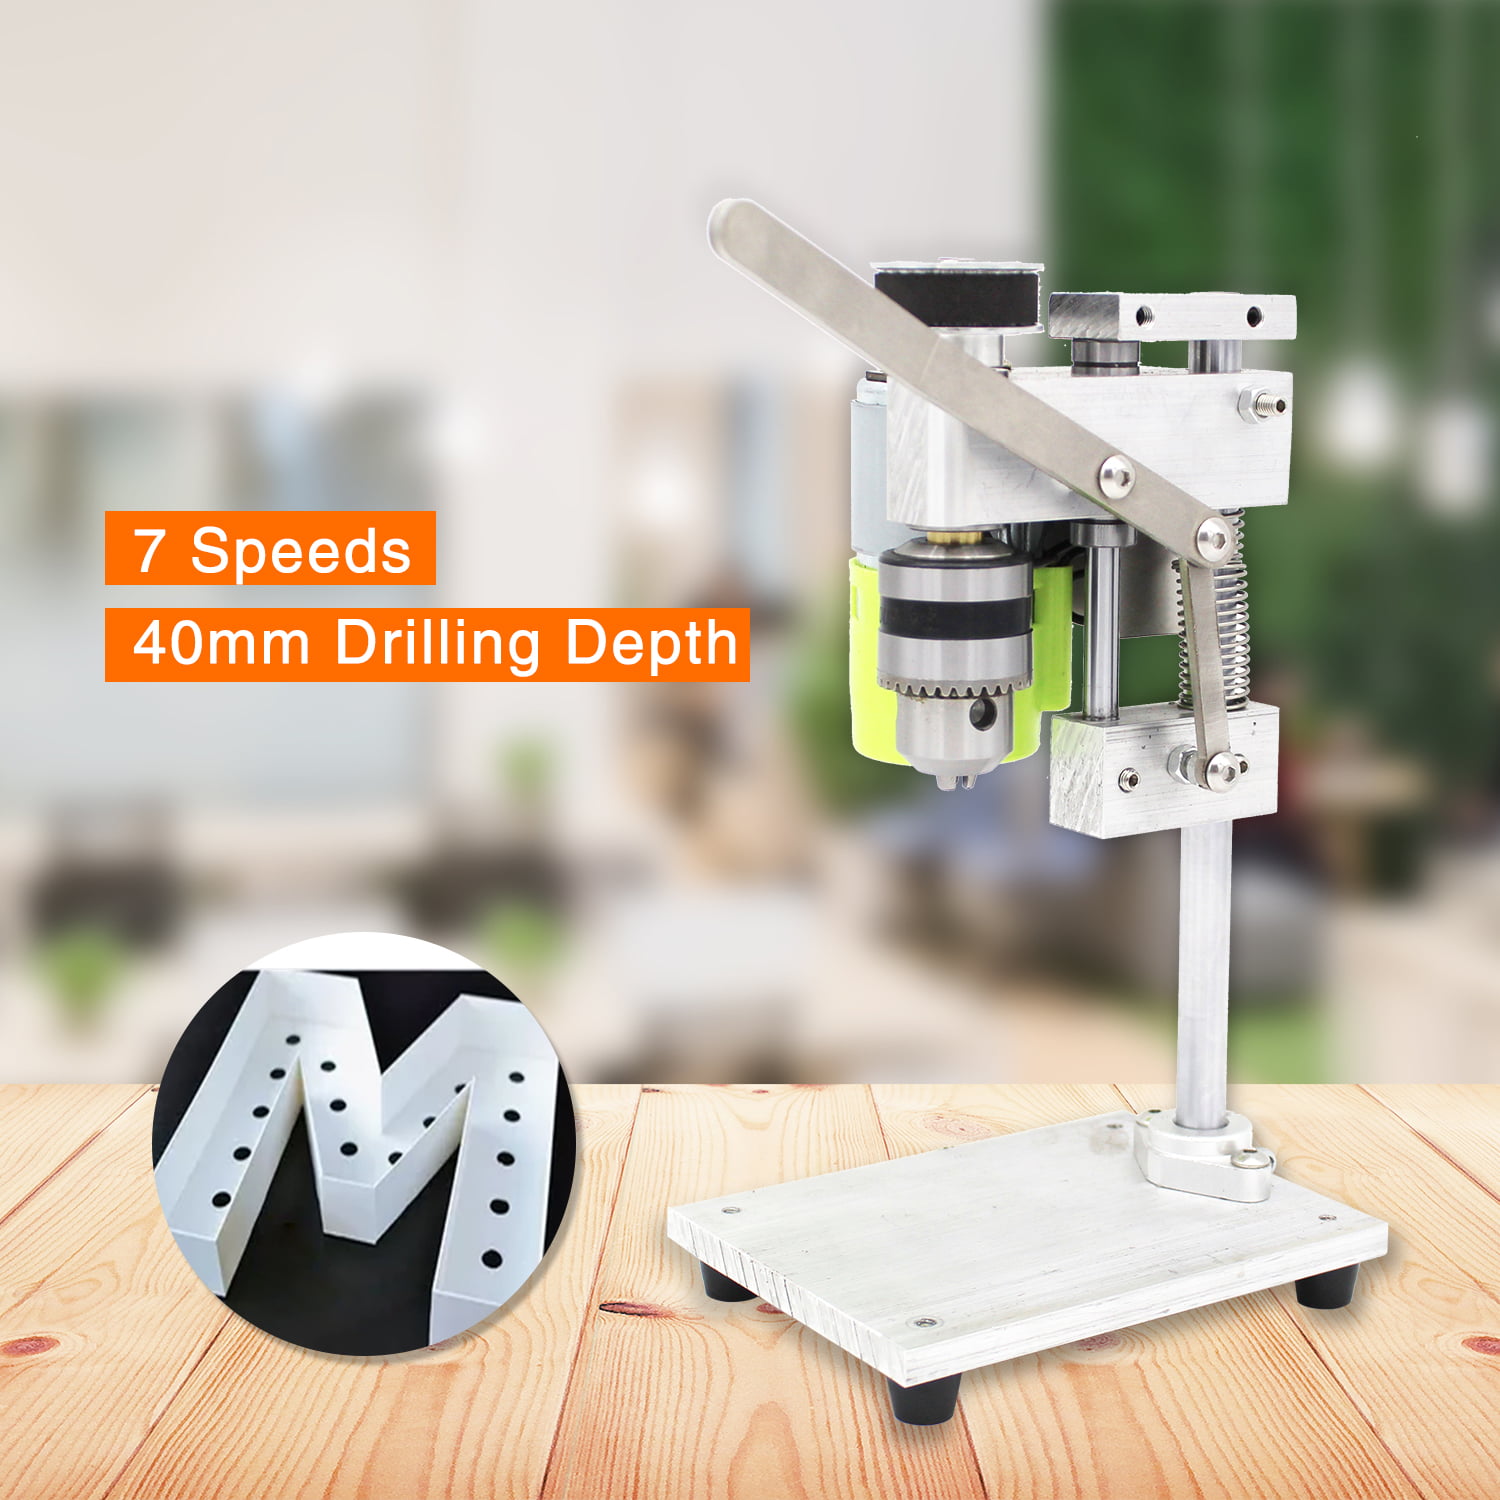 100-240V DIY Mini Drill Press for Bench Drilling Machine Variable Speed Drilling Chuck Mini Table Drill Precision Tapping Machine Milling Machine 1000-4500rpm 7 Speed Adjustable